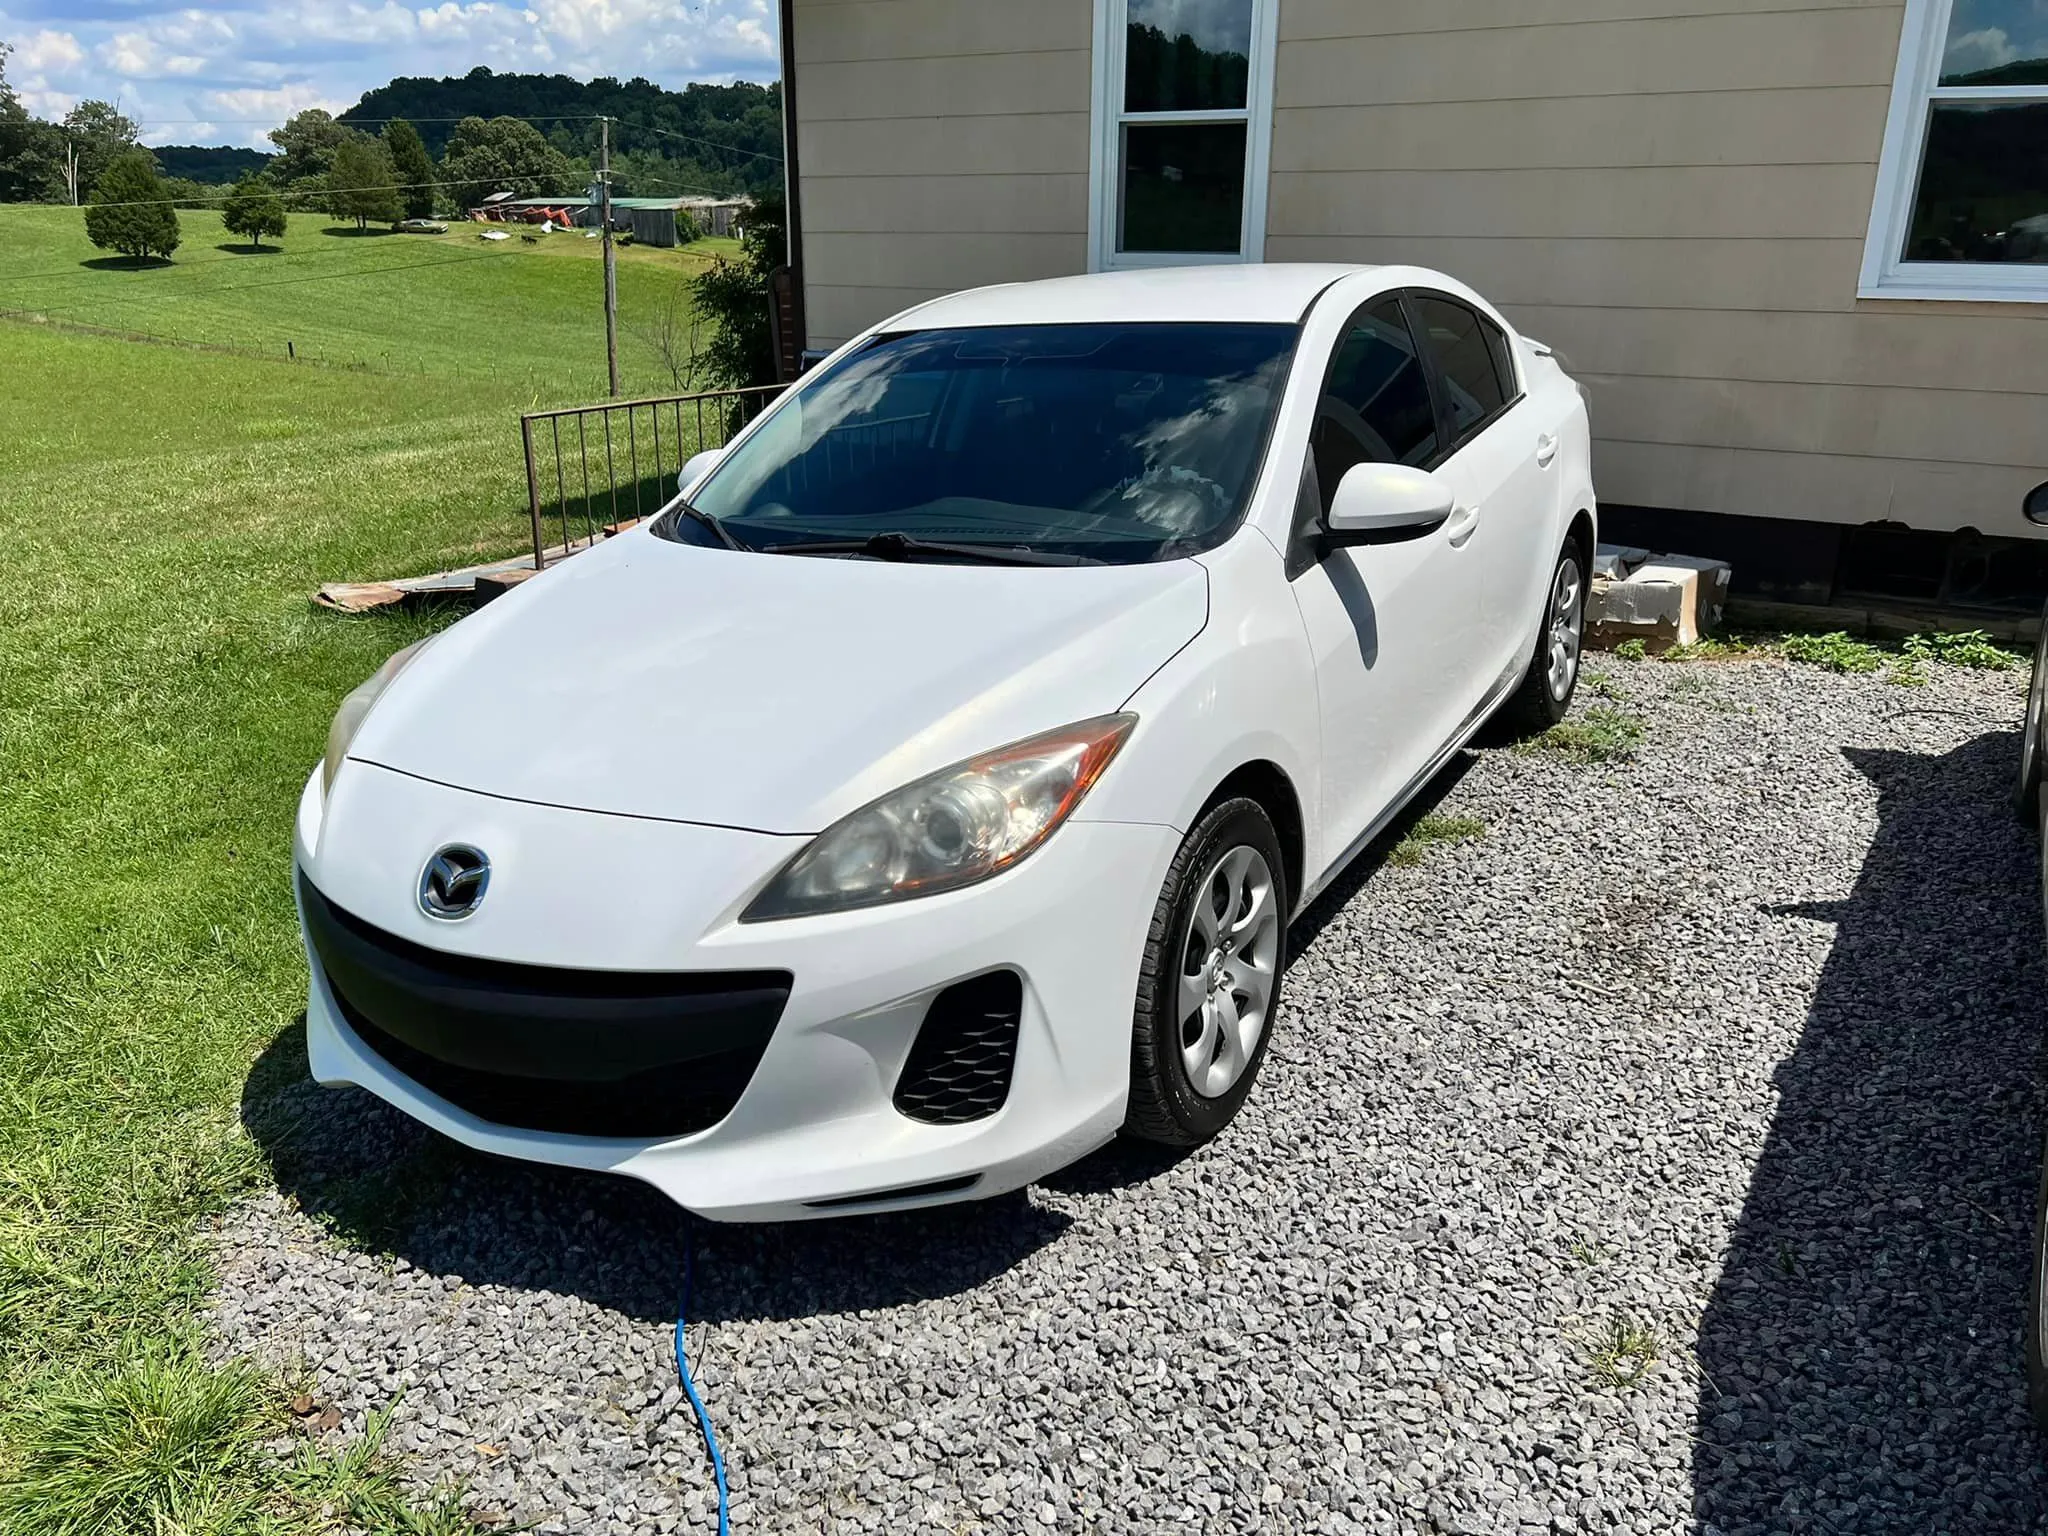 Paint Protection for Will Race’s Window Tinting  in Blountville, TN